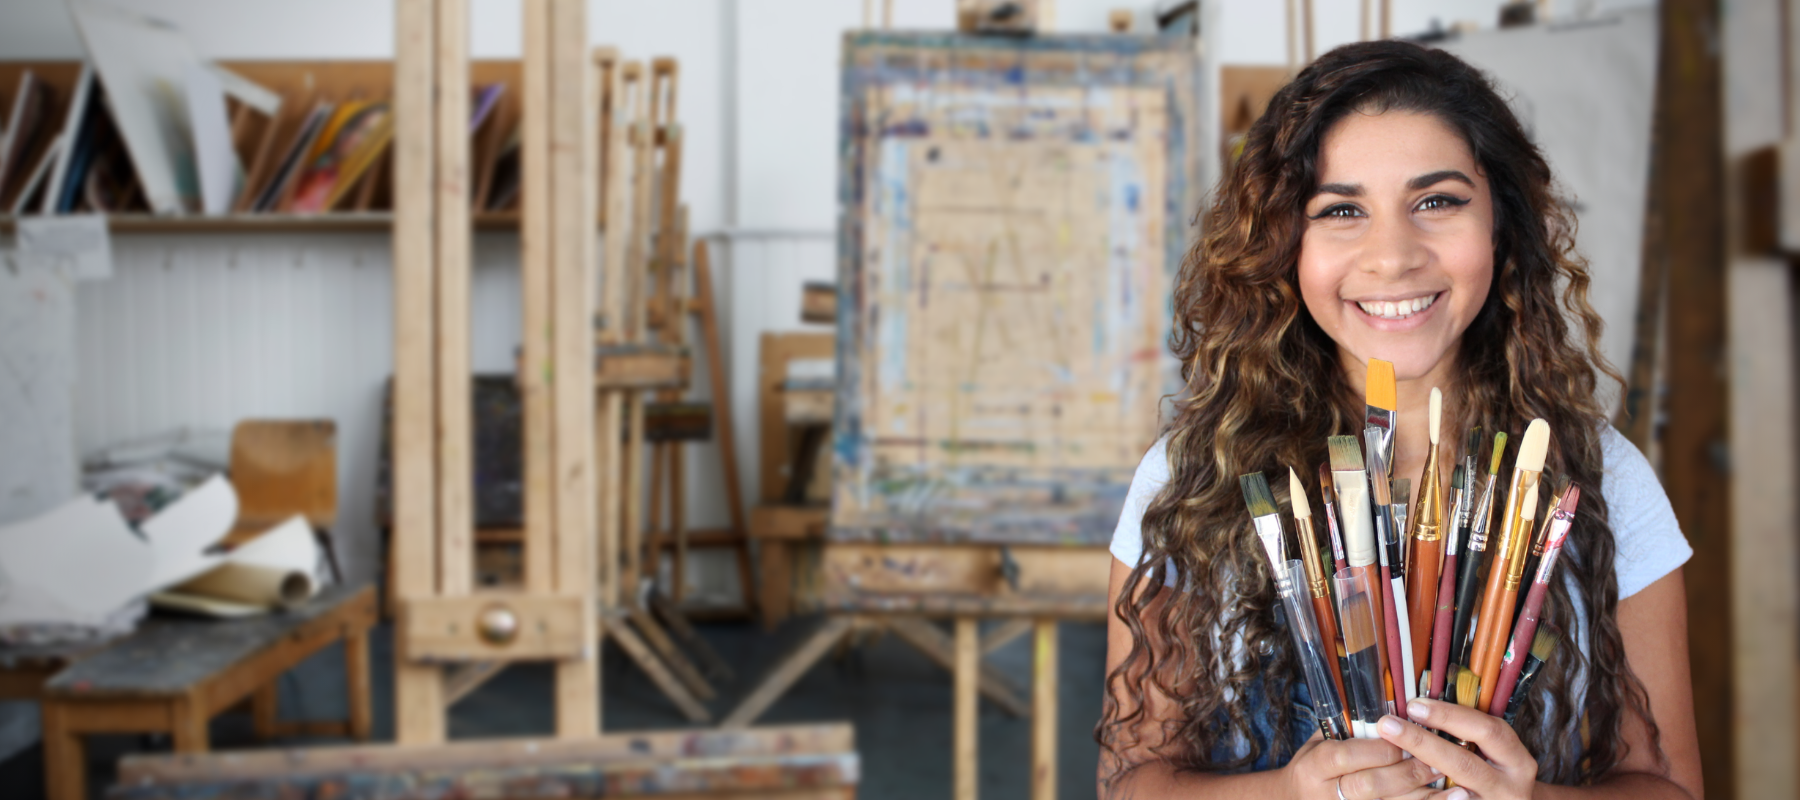 artist Sema Martin, woman with curly brown and blond hair holding a hand full of paint brushes with art easels behind her